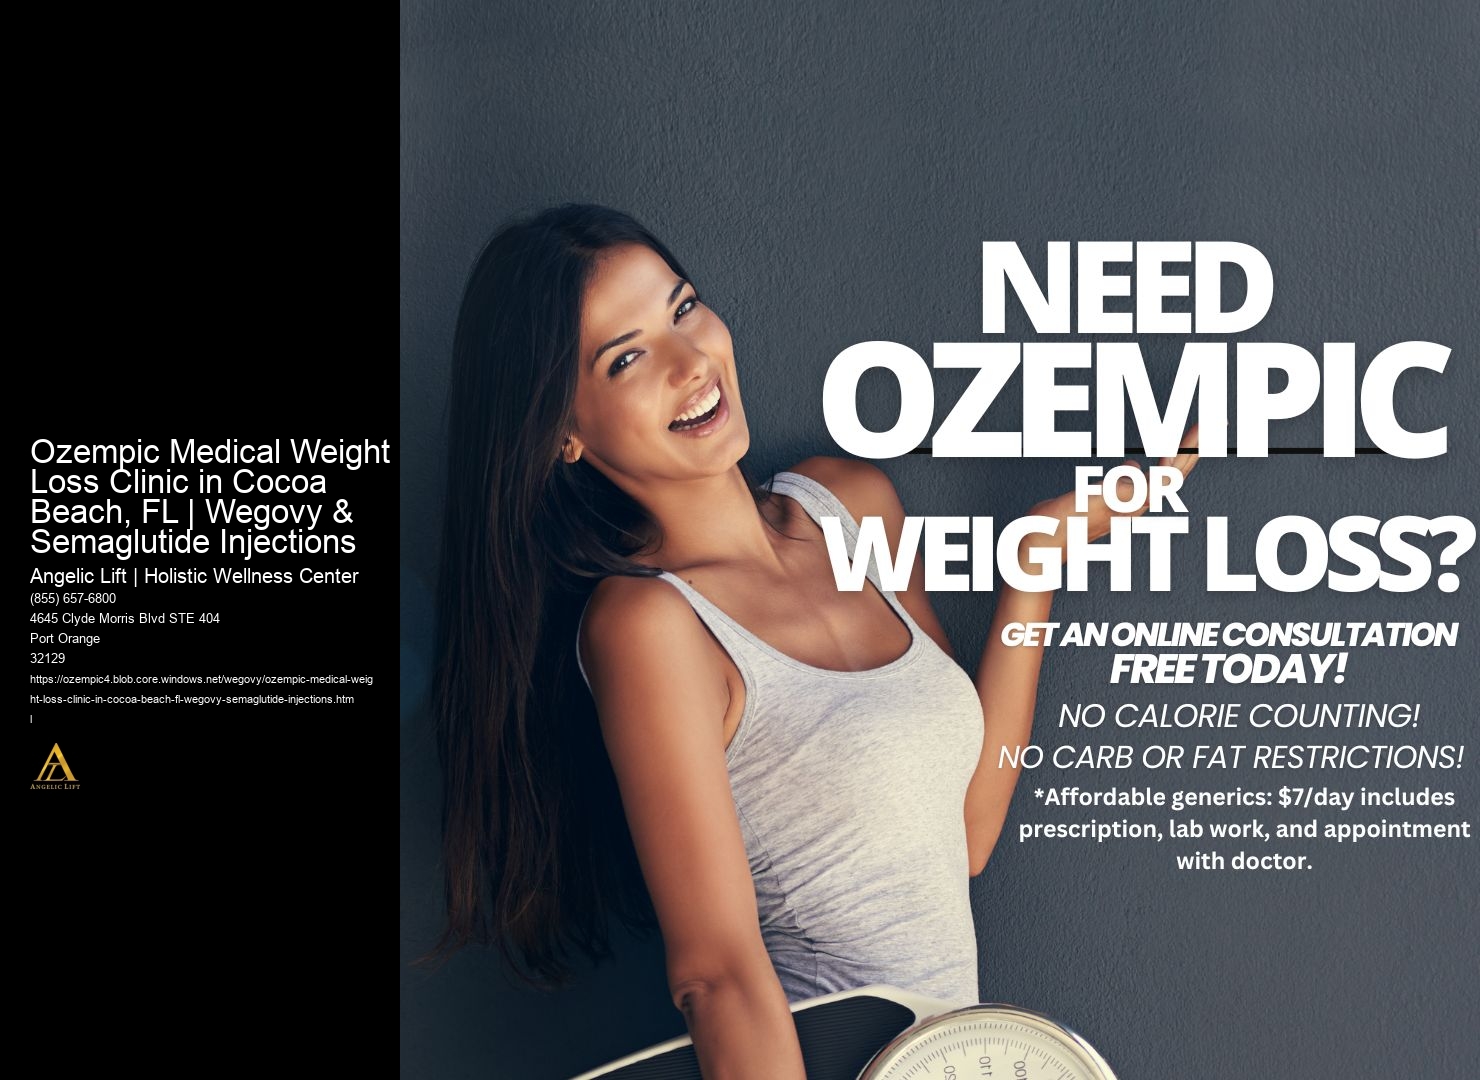 Ozempic Medical Weight Loss Clinic in Cocoa Beach, FL | Wegovy & Semaglutide Injections